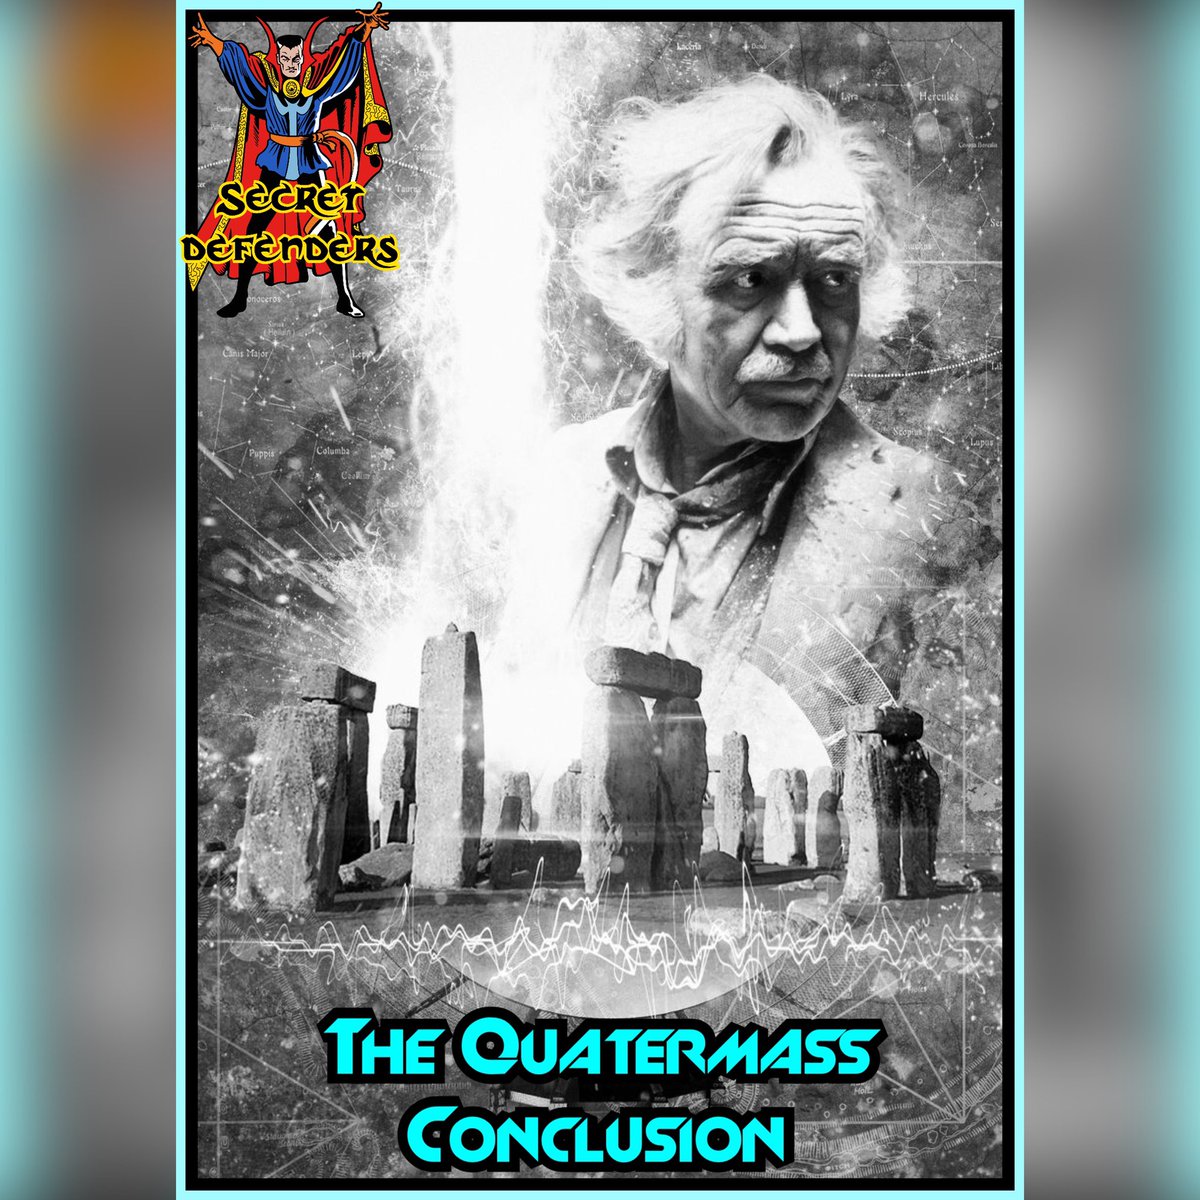 TD Velasquez of @AndNowPodcast returns after being beamed to another planet to celebrate #NigelKneale’s centenary as he defends the underrated final entry in Kneale’s #Quatermass saga #TheQuatermassConclusion #PrepareForPrattle pod.fo/e/13fd34